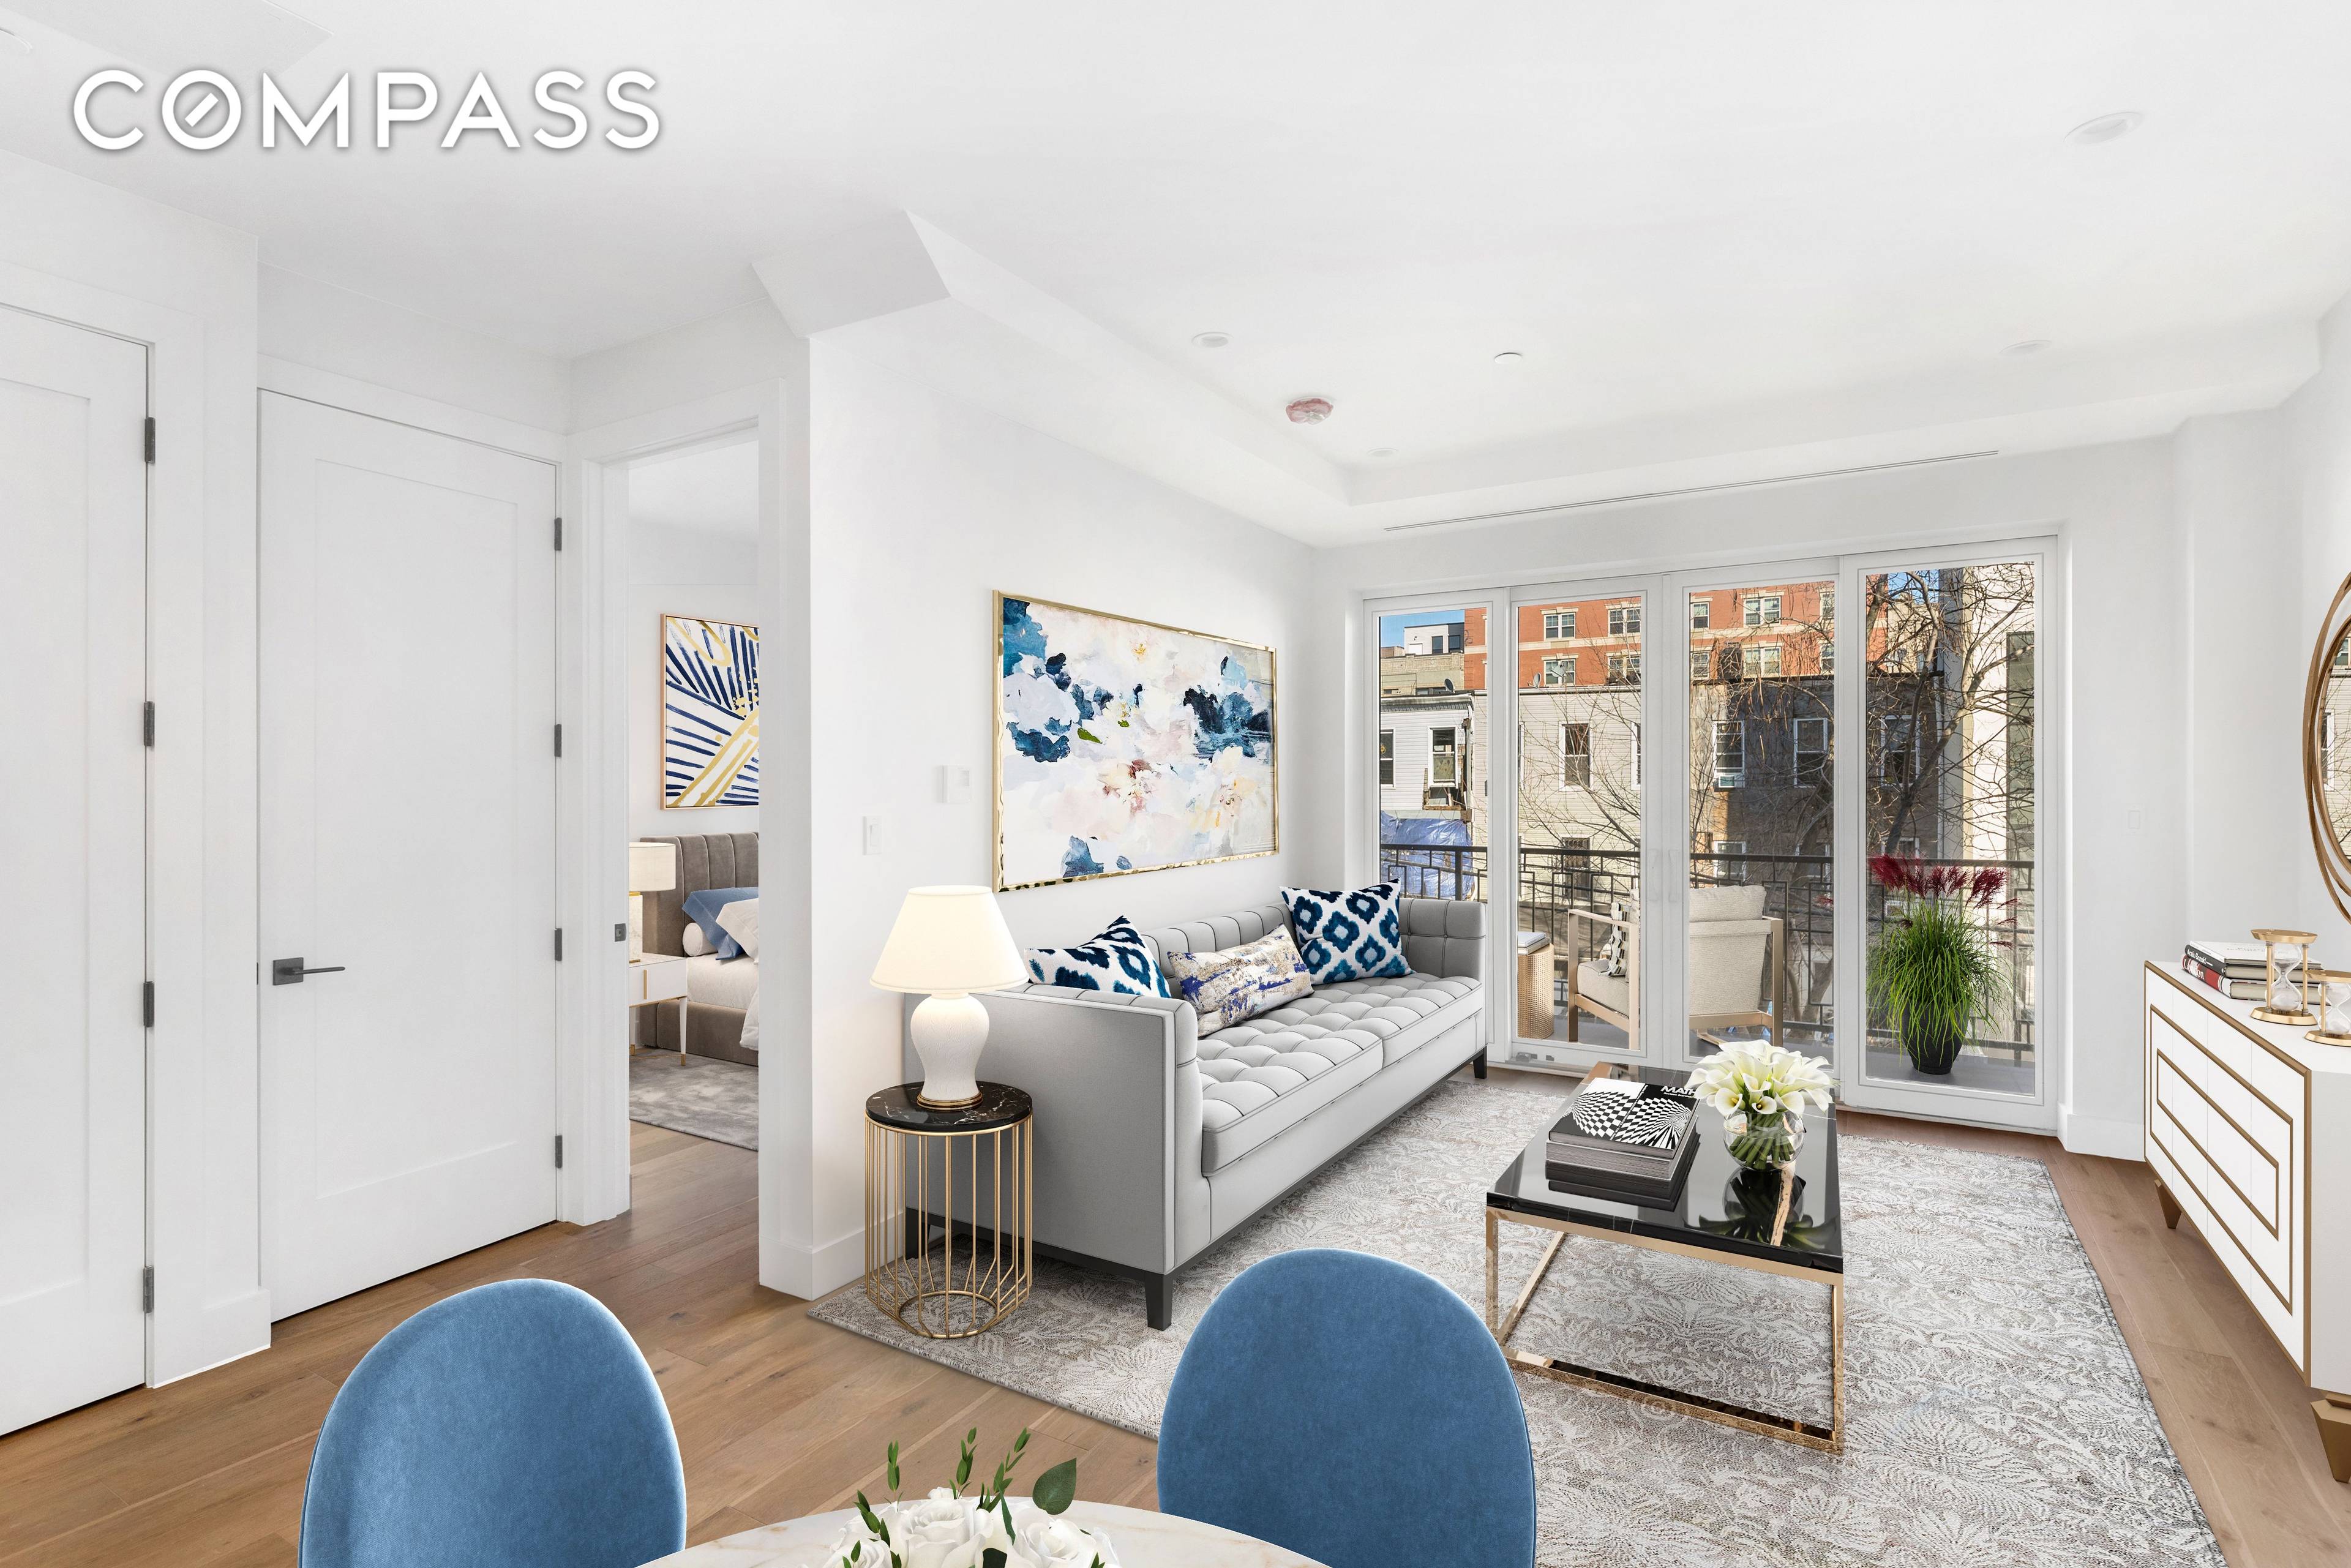 New Development Boutique Luxury Condo Bed Stuy Expansive Residences with Spacious, Open Concept Studio, 1, and 2 Bedroom Layouts, All Include Private Outdoor Space, In Unit Washer and Dryer, Sprawling ...